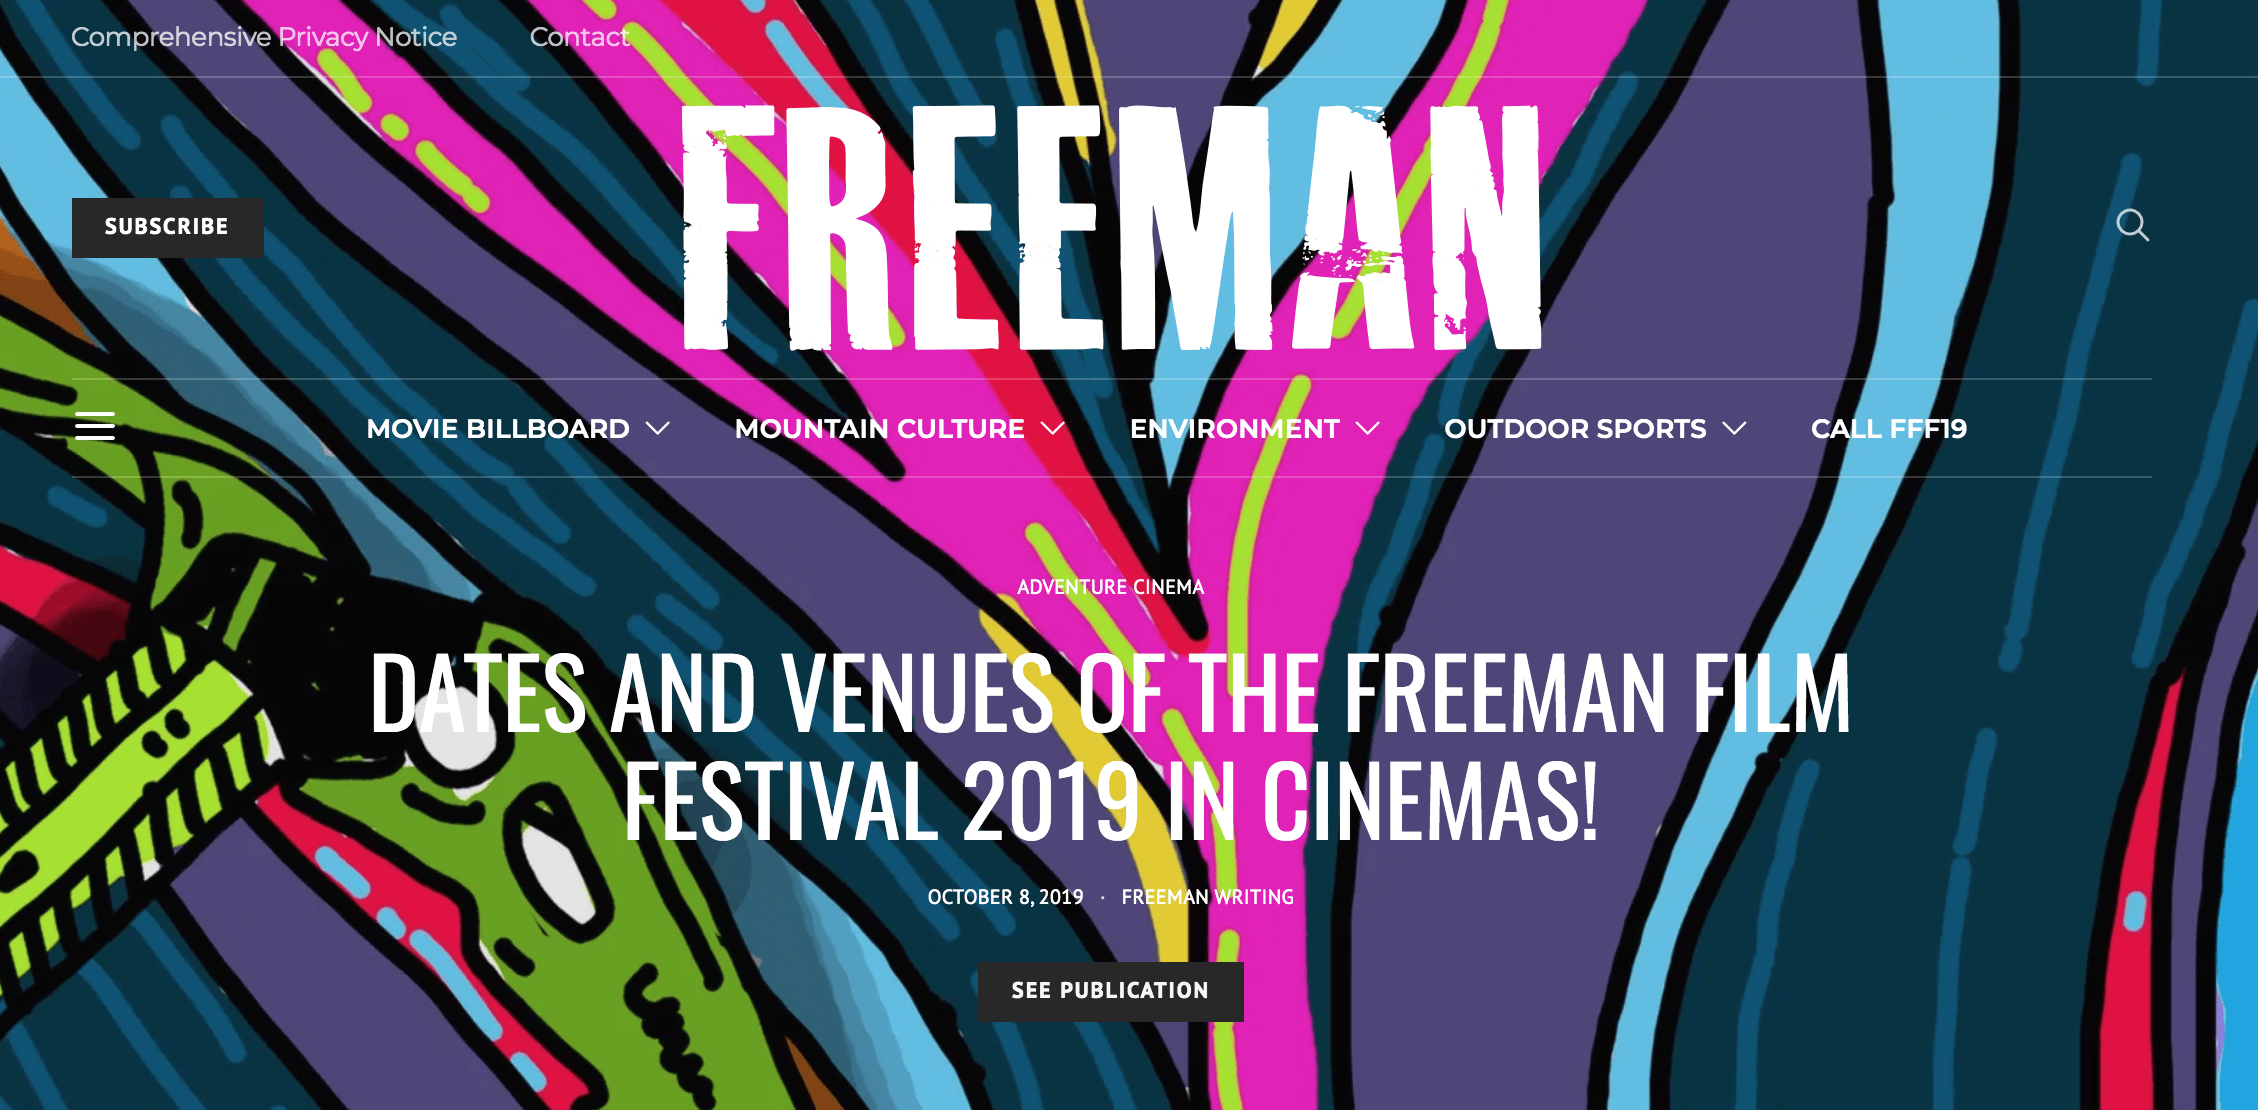 The Flip, Official Selection at Freeman Film Festival, showing in 43 theaters across Mexico